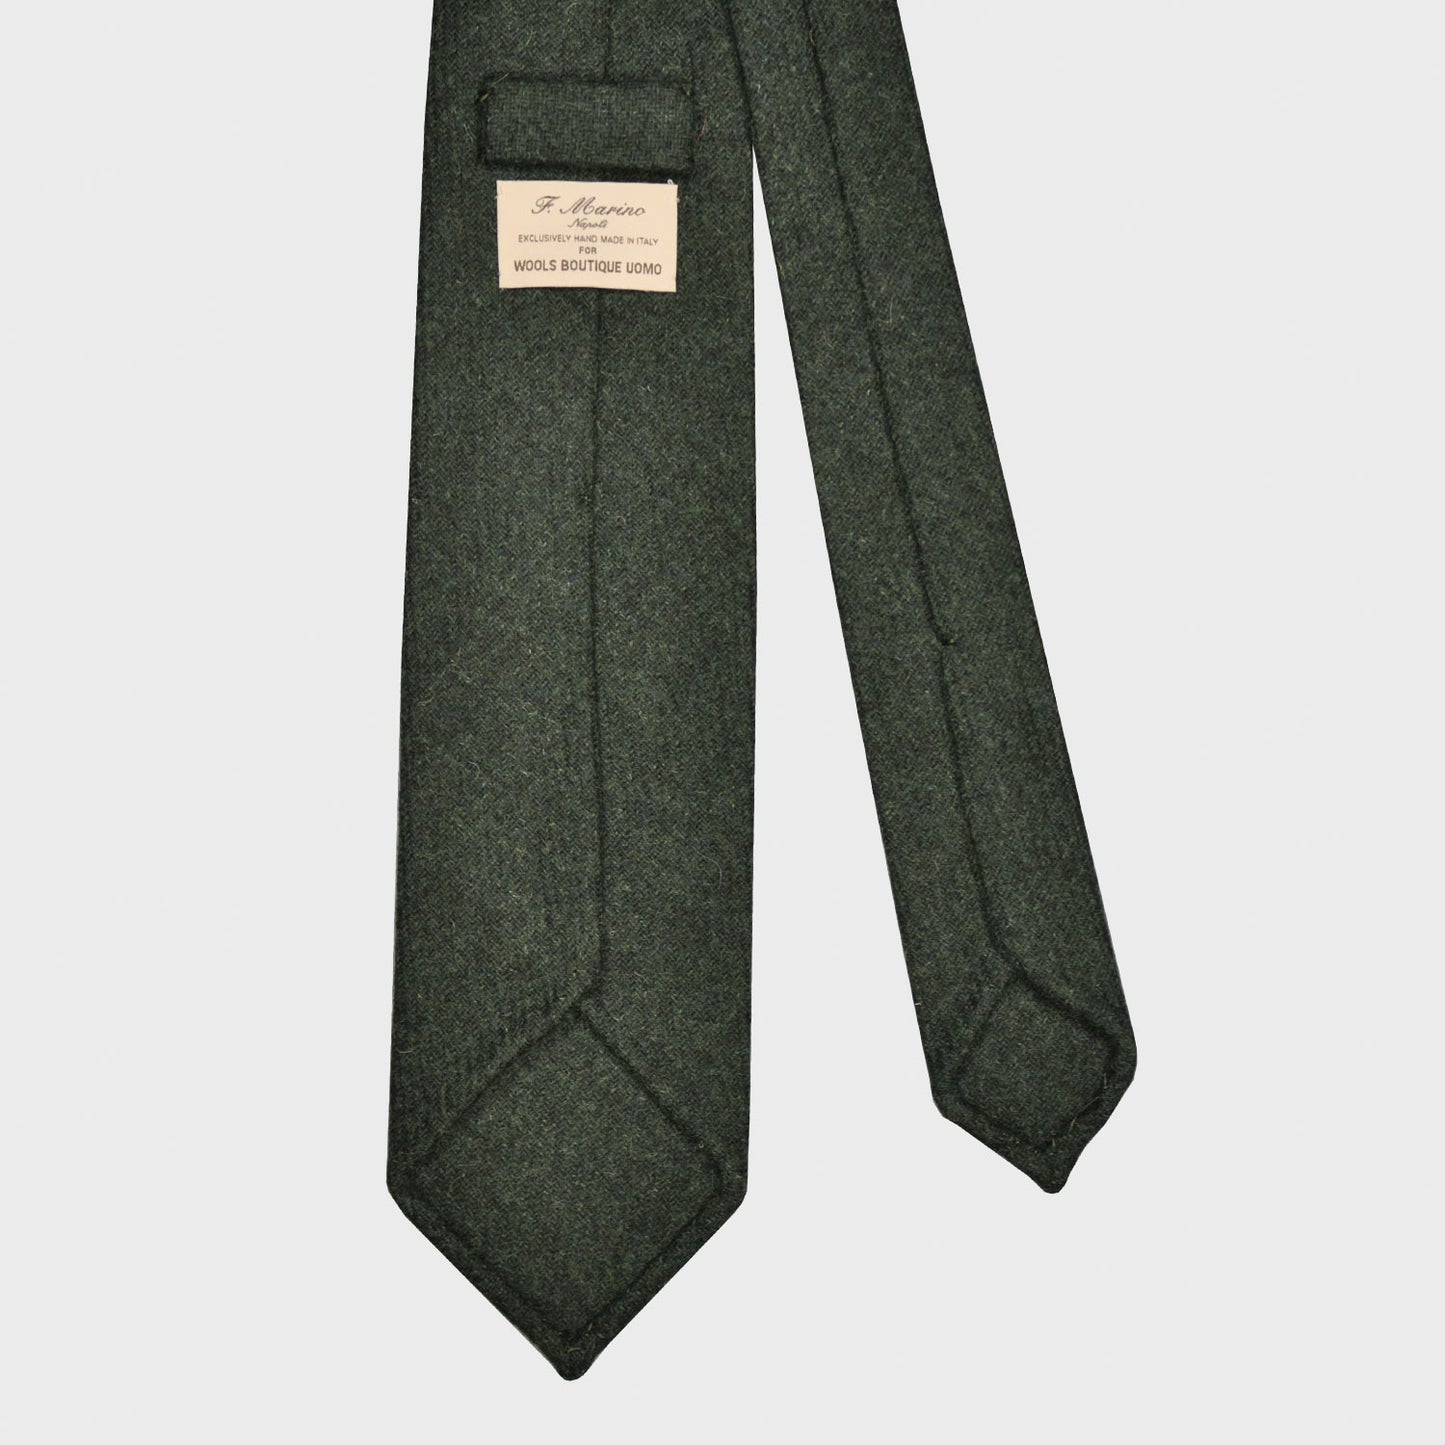 Load image into Gallery viewer, F.Marino Tweed Tie 3 Folds Bottle Green-Wools Boutique Uomo
